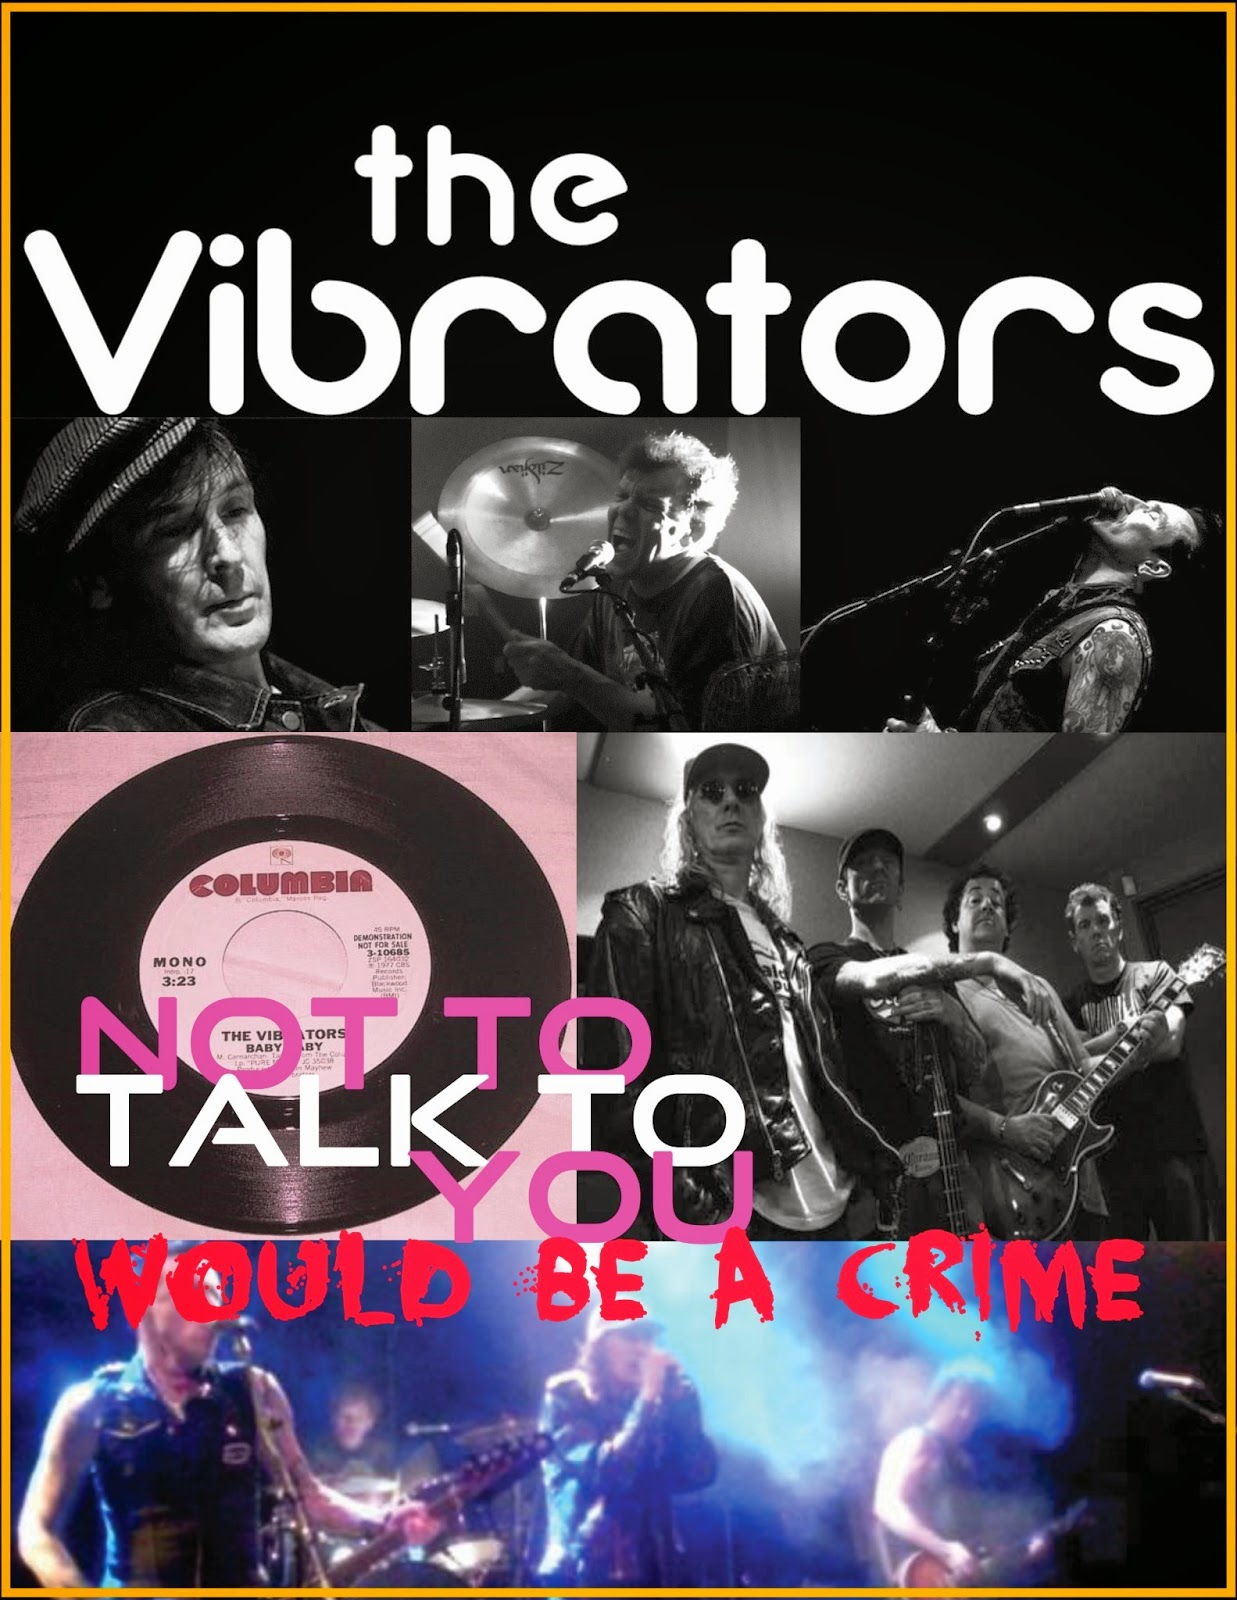 interview with a vibrator